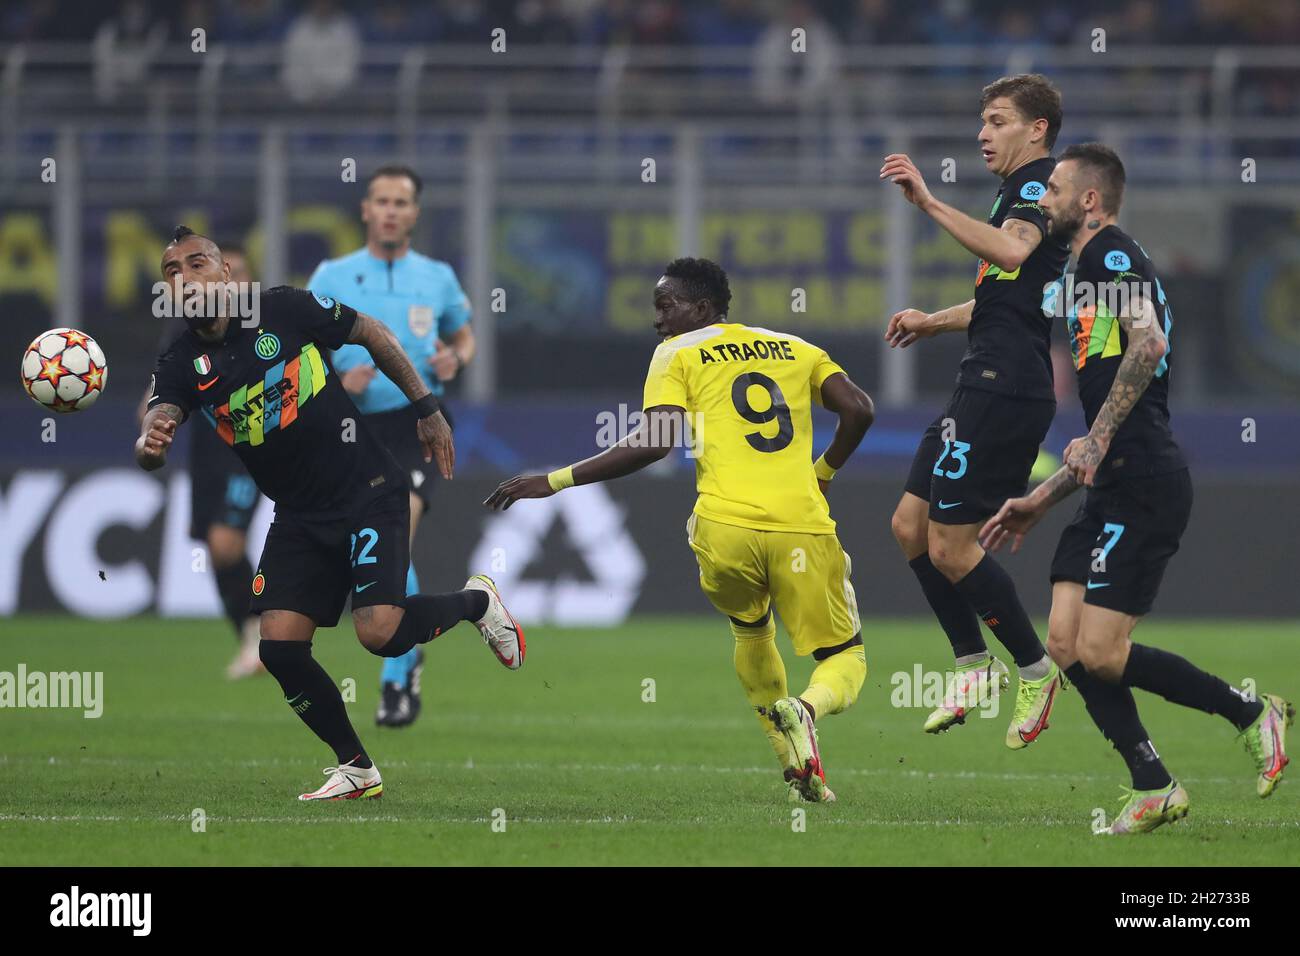 Milan, Italy, 19th October 2021. Nicolo Barella and Marcelo Brozovic of FC Internazionale look on as team mate Arturo Vidal dispossesses Adama Traore of Sheriff Tiraspol during the UEFA Champions League match at Giuseppe Meazza, Milan. Picture credit should read: Jonathan Moscrop / Sportimage Stock Photo